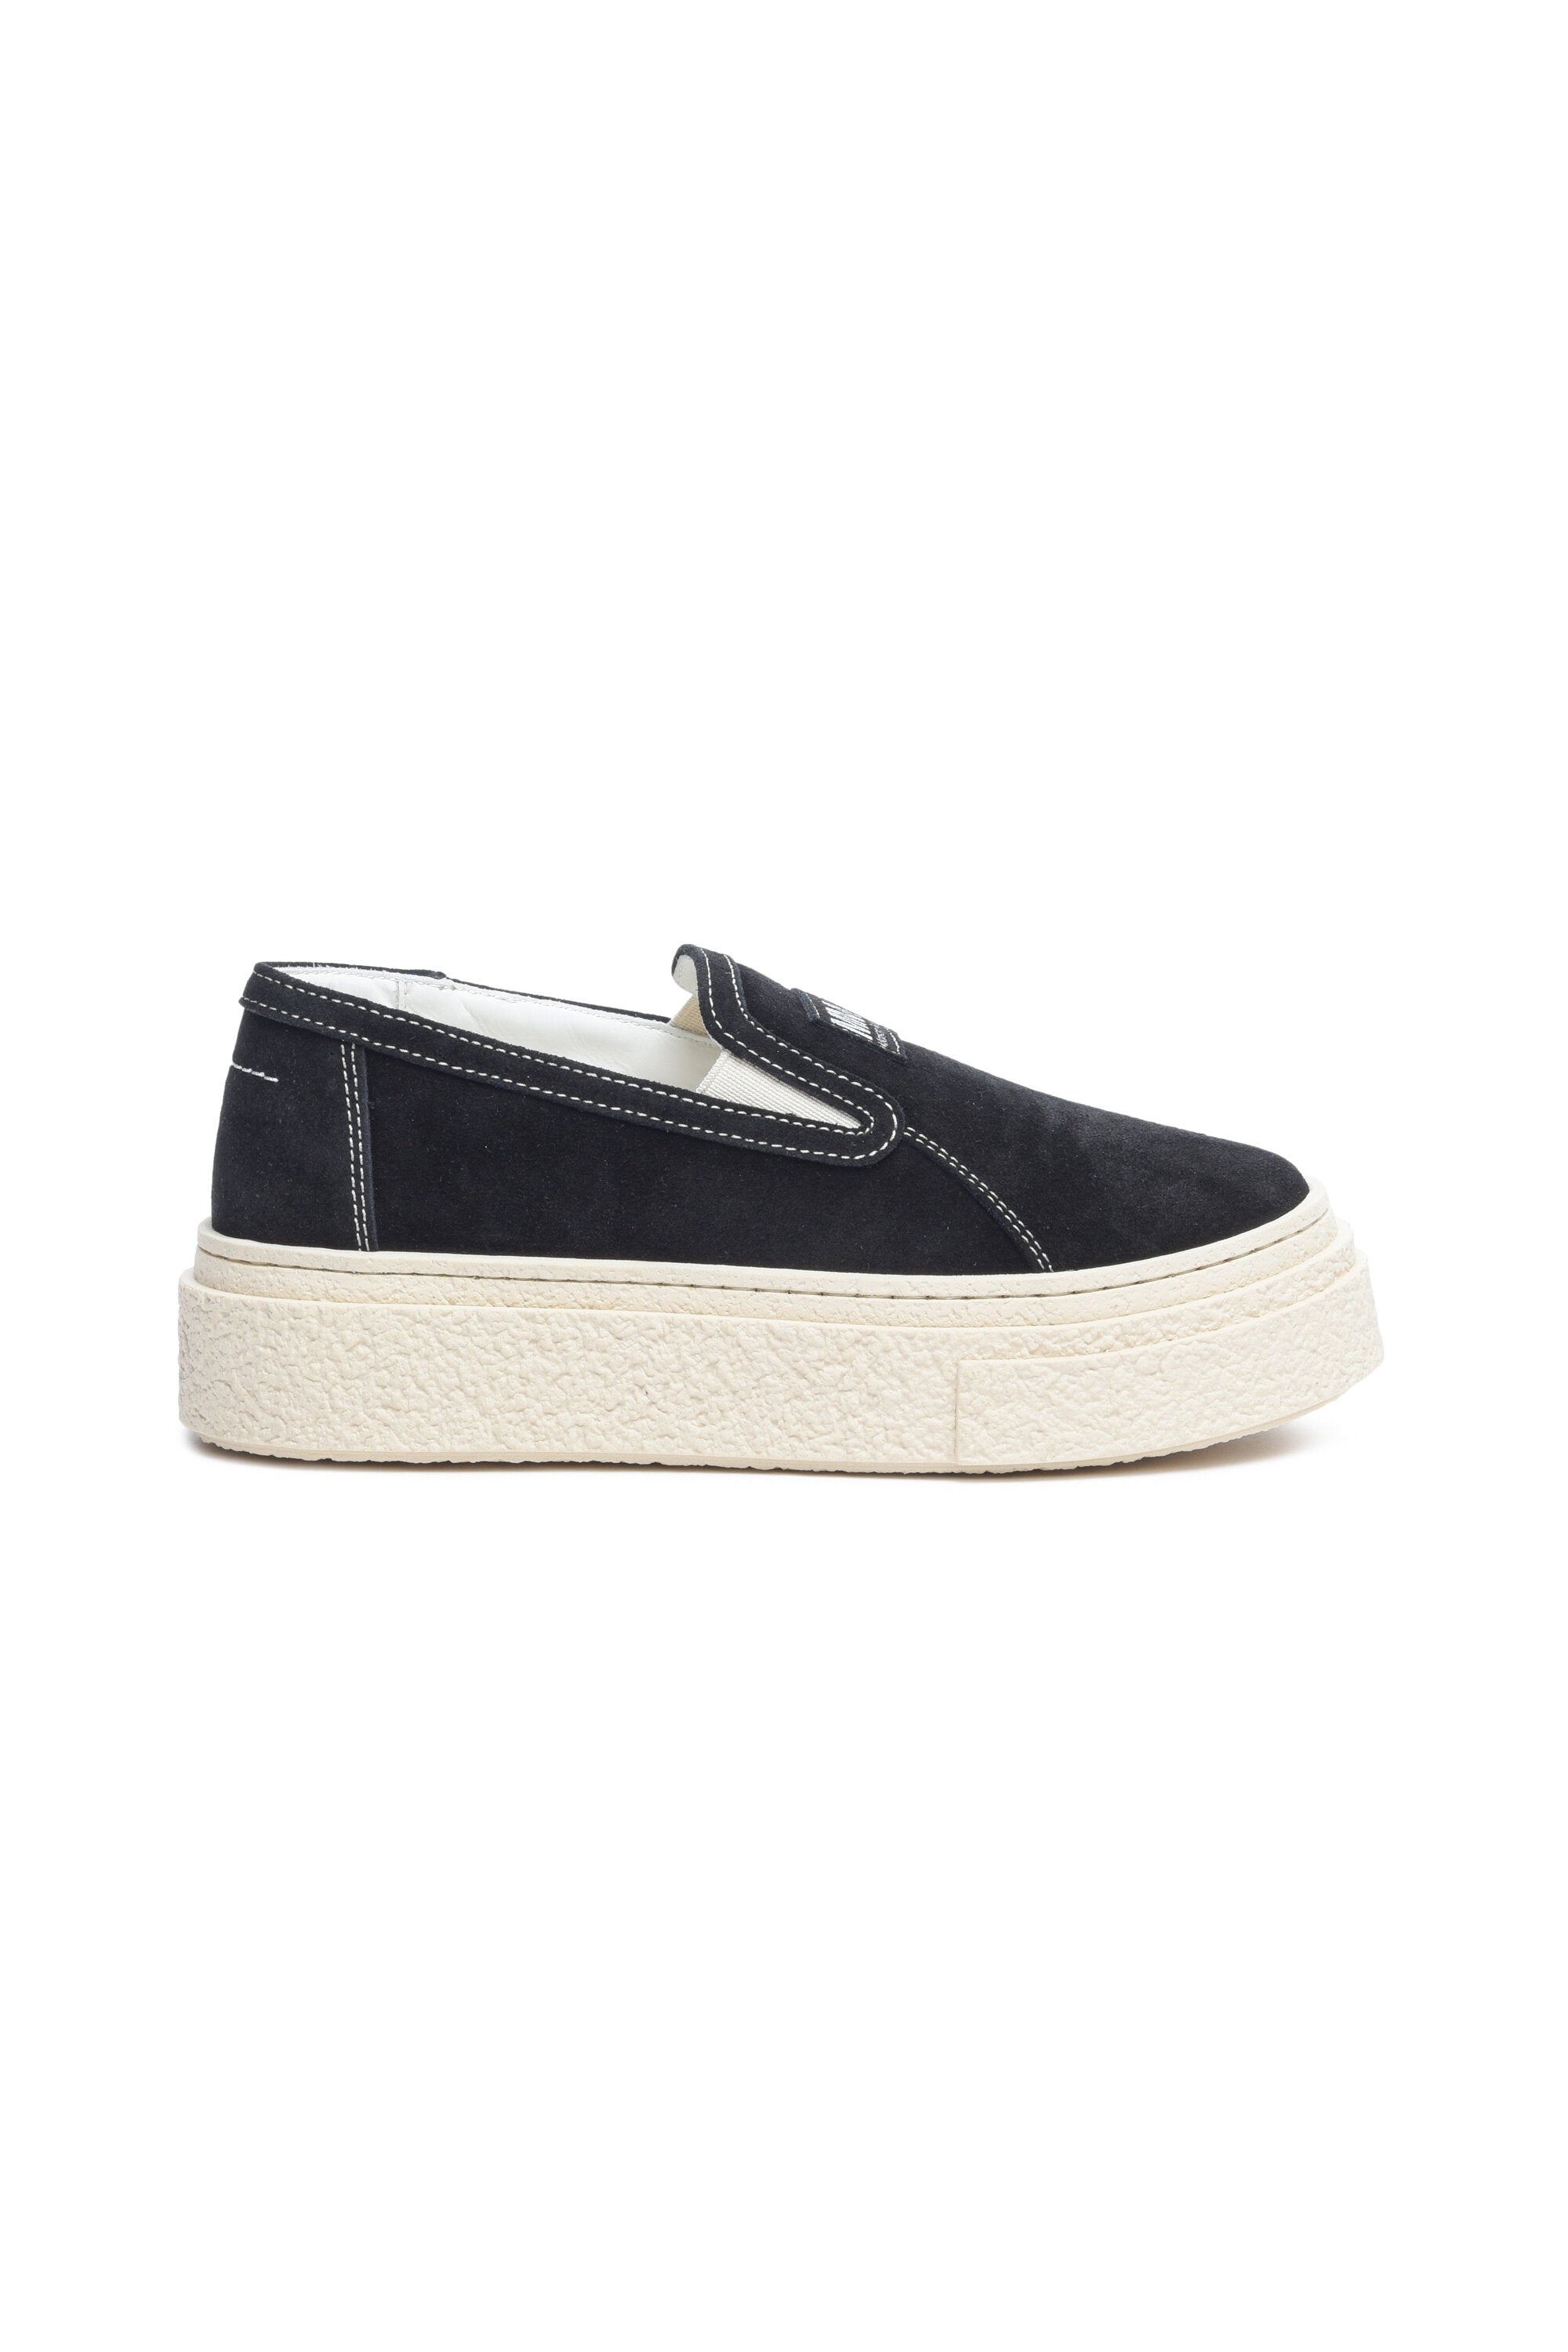 MM6 teen unisex slip-on shoes with logo | BRAVE KID